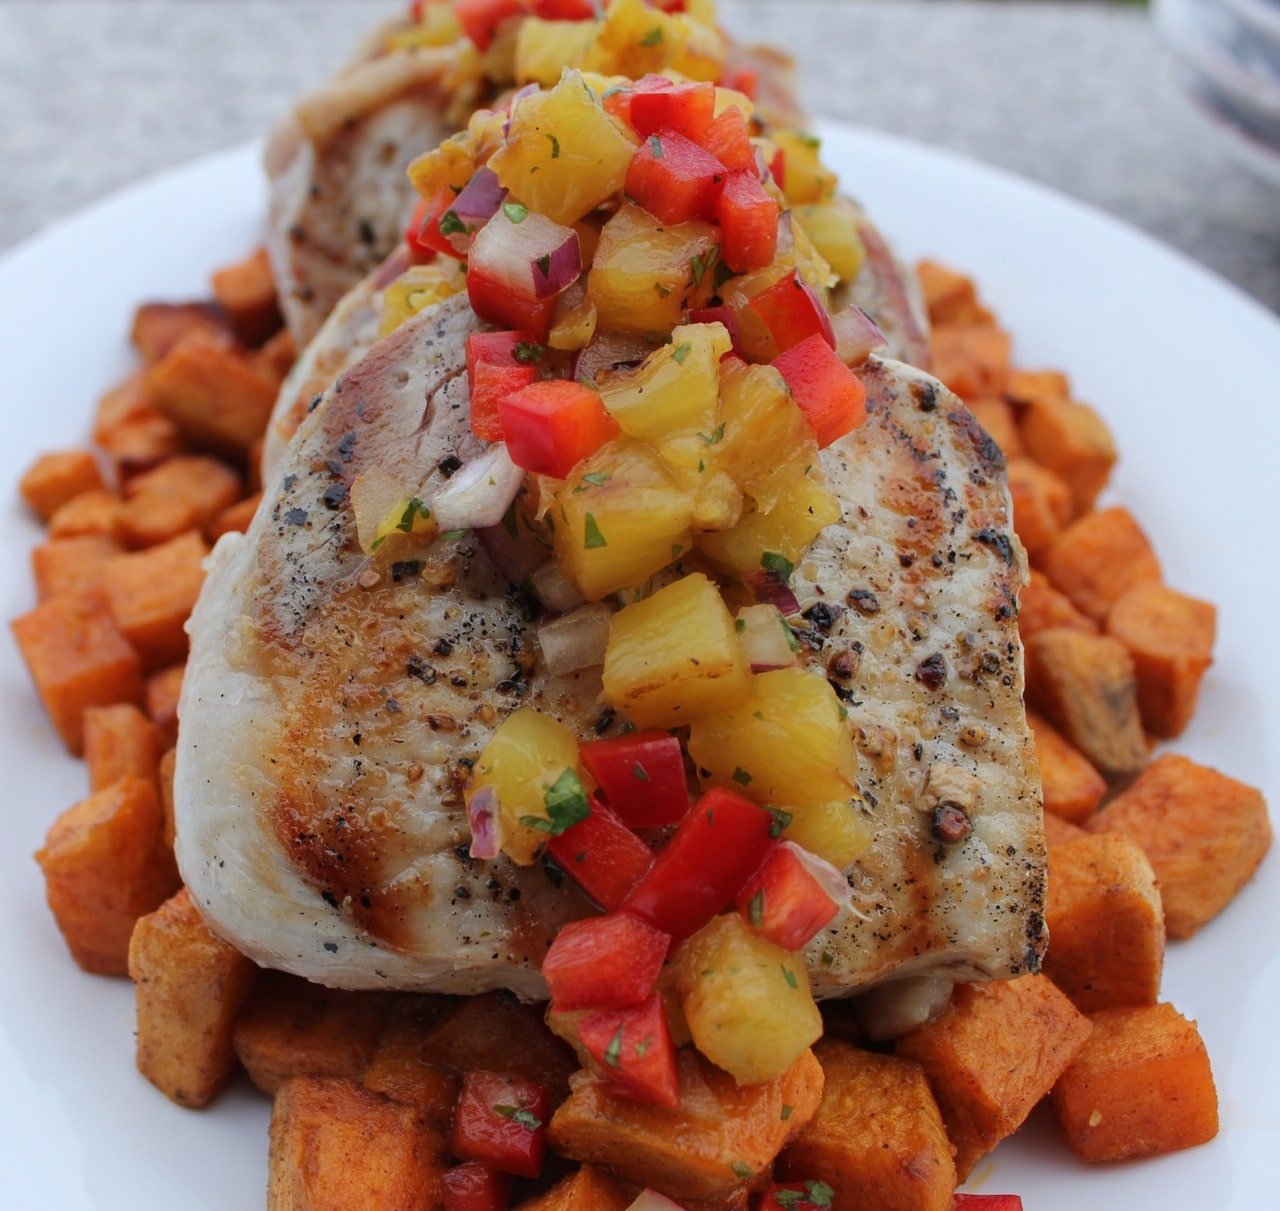 pork-chops-with-grilled-pineapple-salsa-and-spiced-sweet-potatoes-4